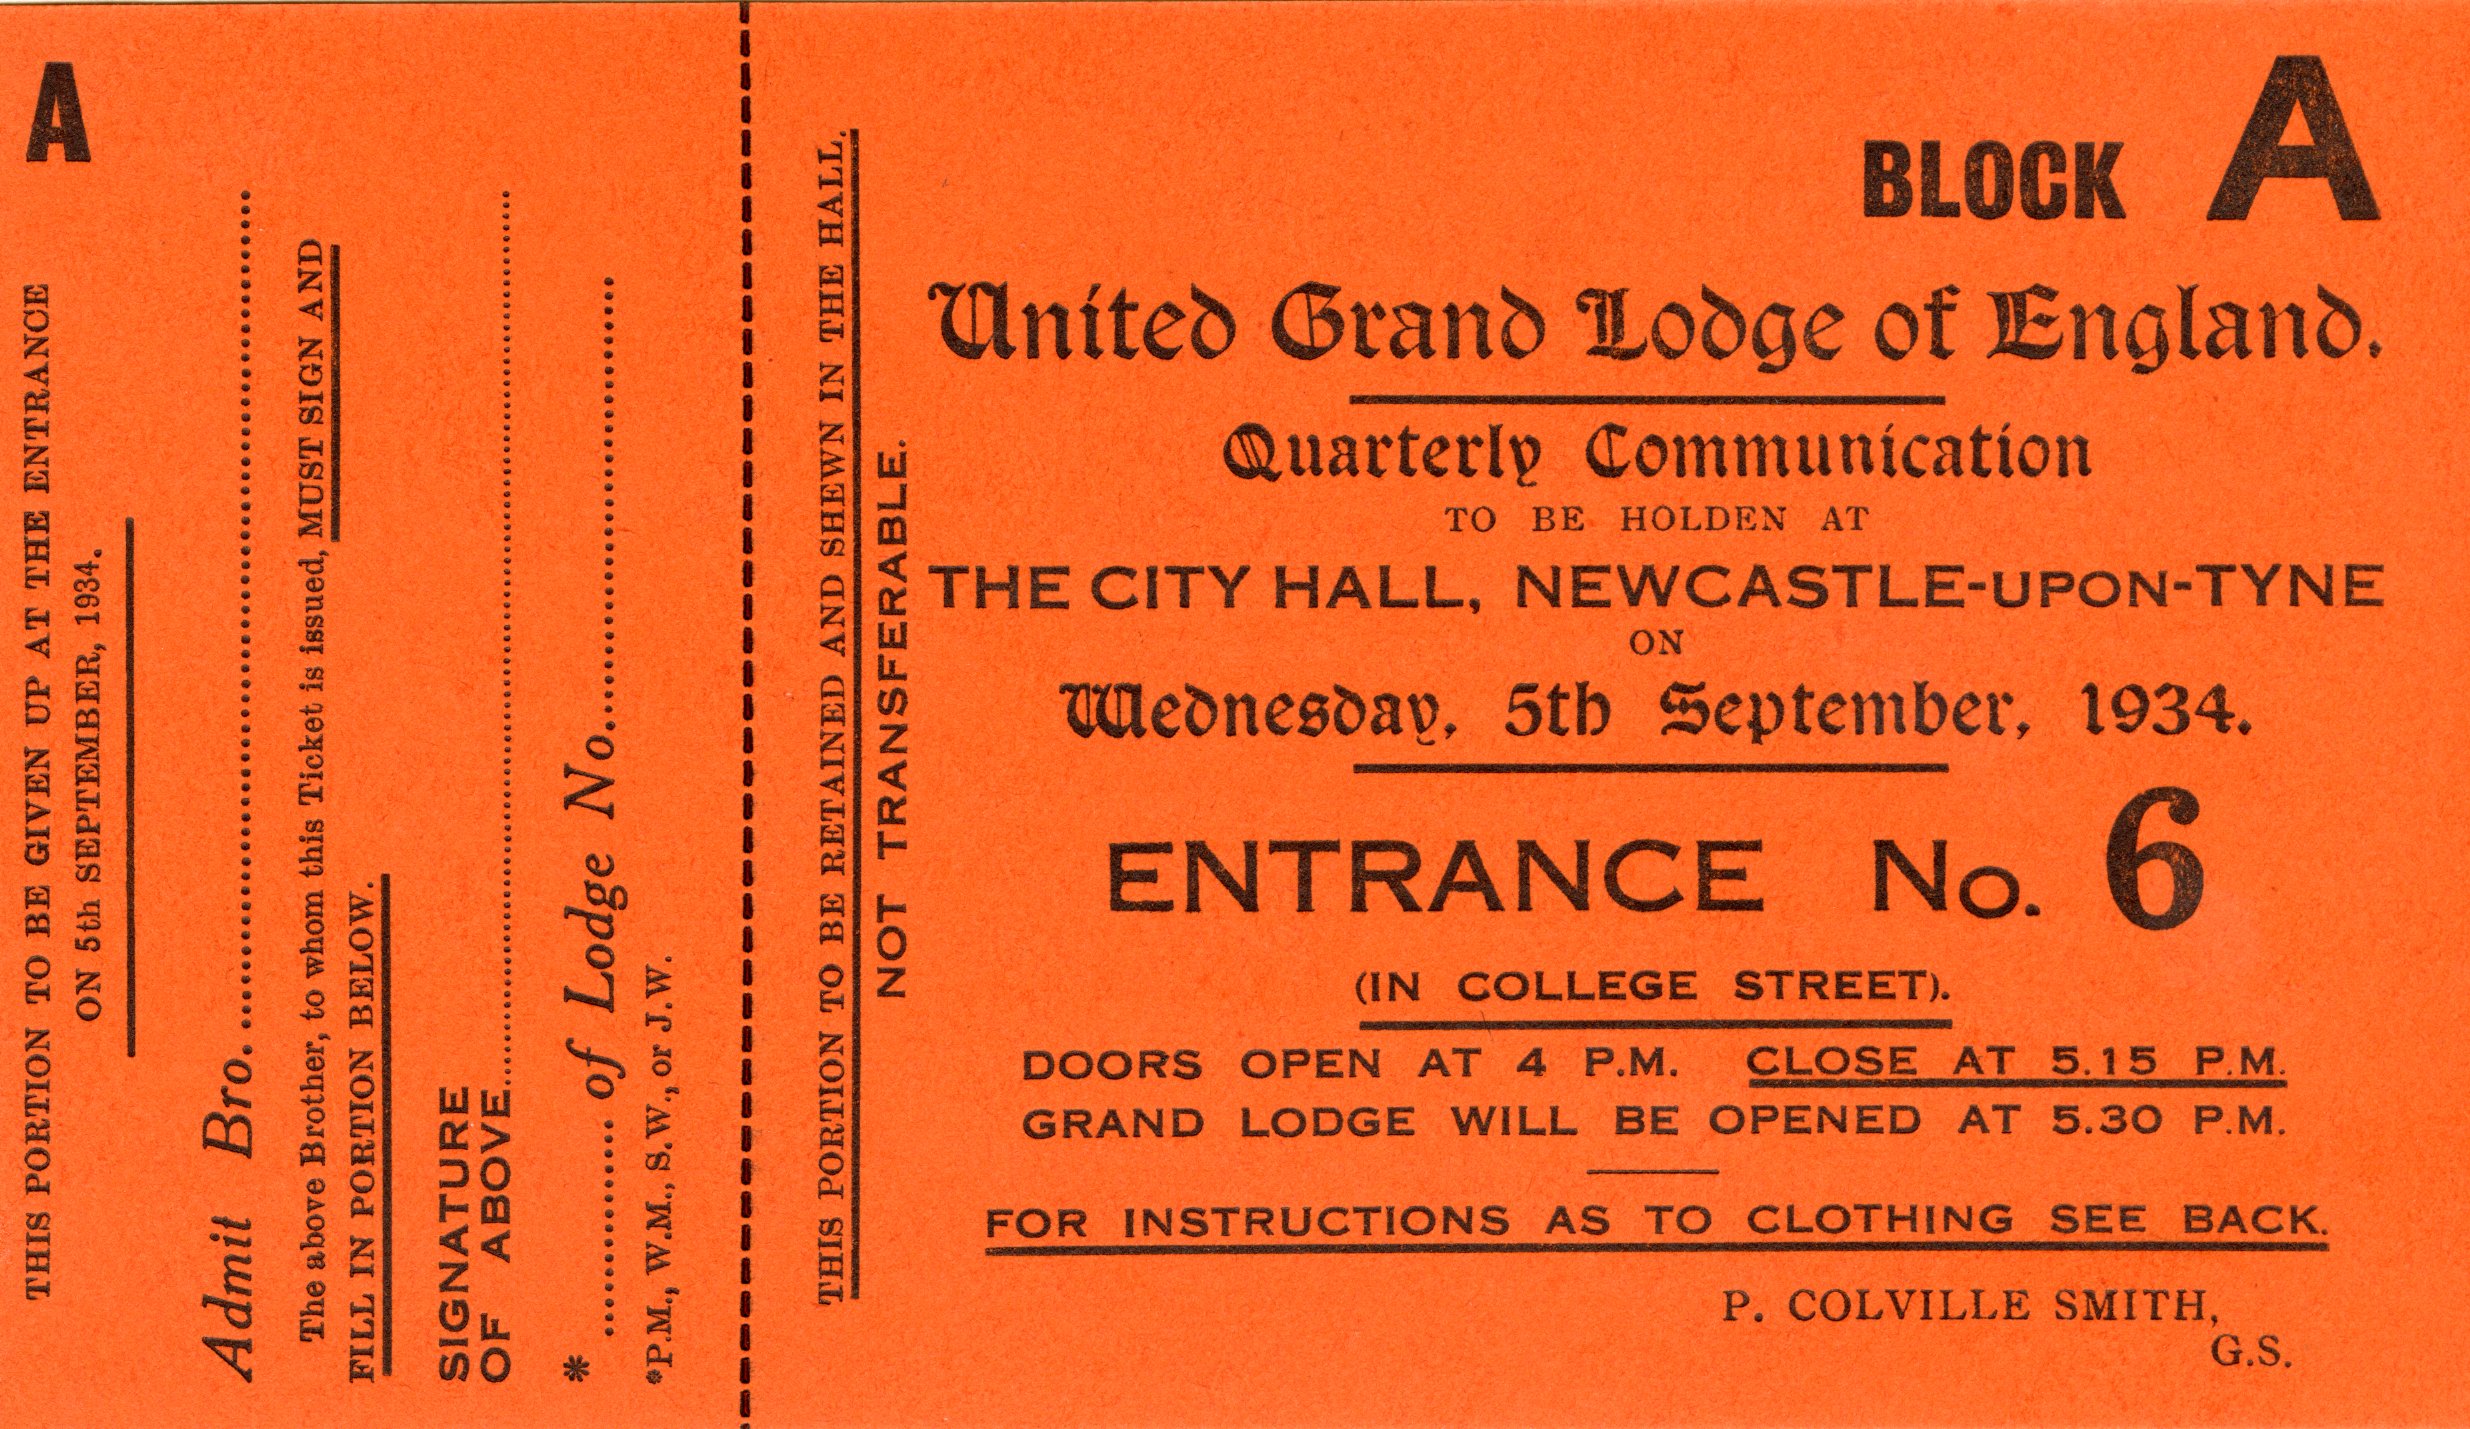 Orange ticket to access the September 1934 Quarterly Communication of Grand Lodge in Newcastle